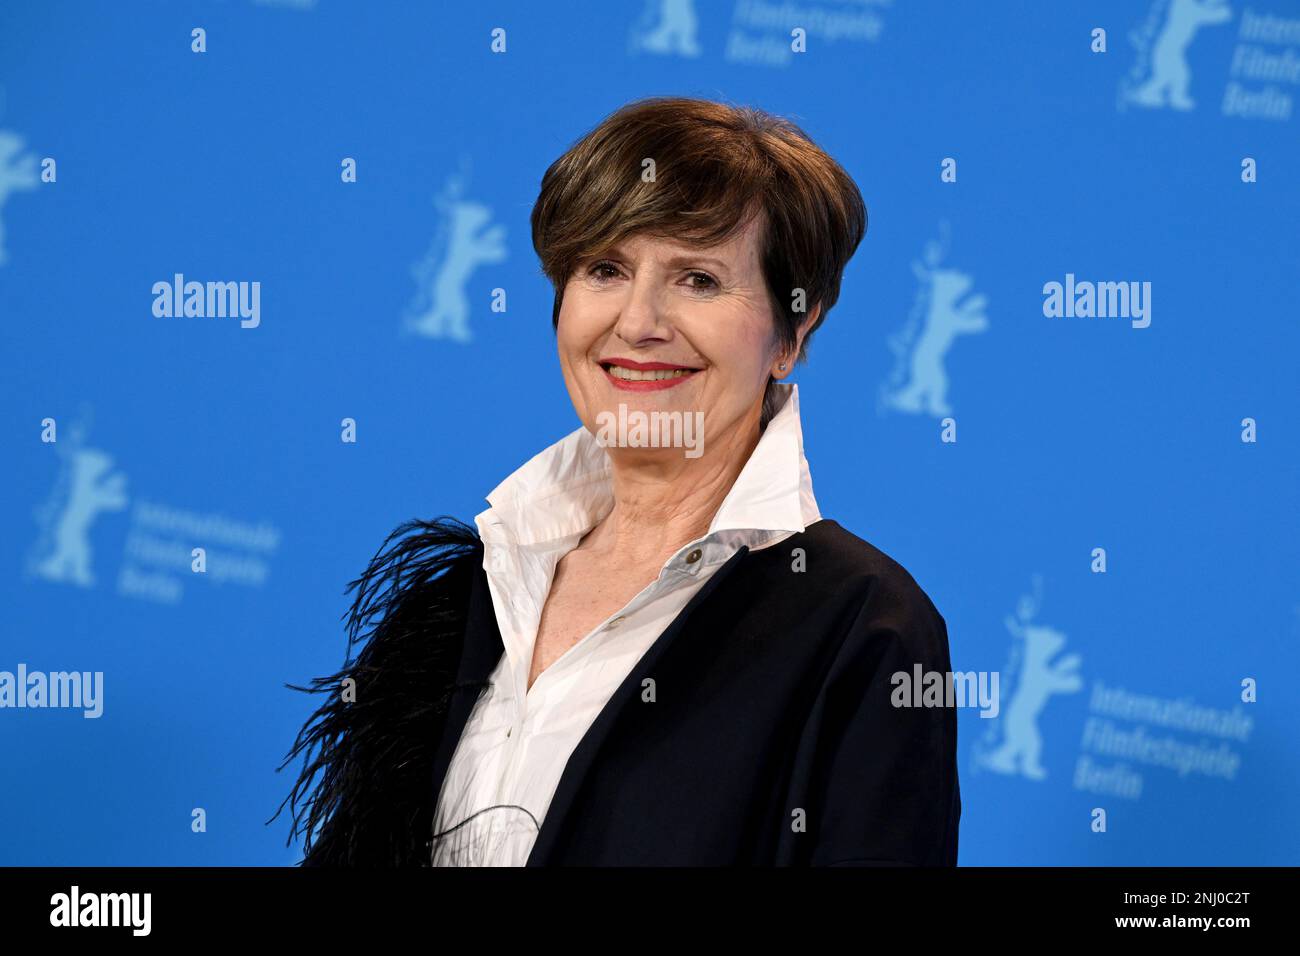 Berlin, Germany. 22nd Feb, 2023. Itziar Lazkano, actress, arrives for the Photo Call of the film 'especies de abejas' (20,000 Species of Bees), which is in competition at the Berlinale. The 73rd International Film Festival will be held in Berlin from 16 - 26.02.2023. Credit: Jens Kalaene/dpa/Alamy Live News Stock Photo